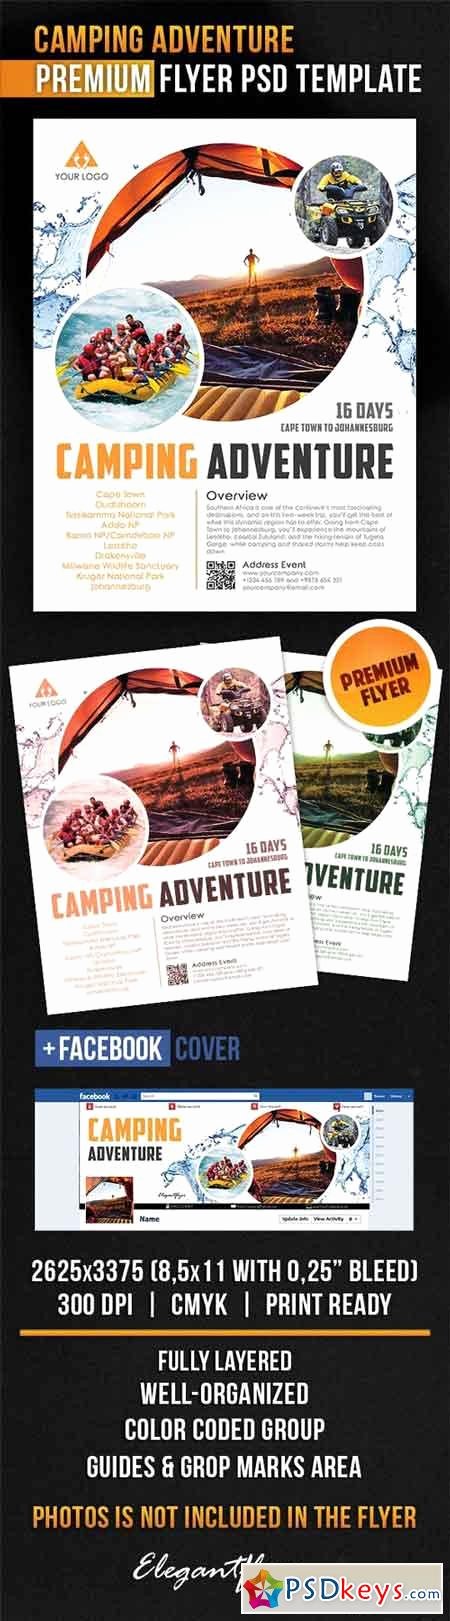 Facebook Ad Template Psd Awesome Camping Adventure – Flyer Psd Template Cover